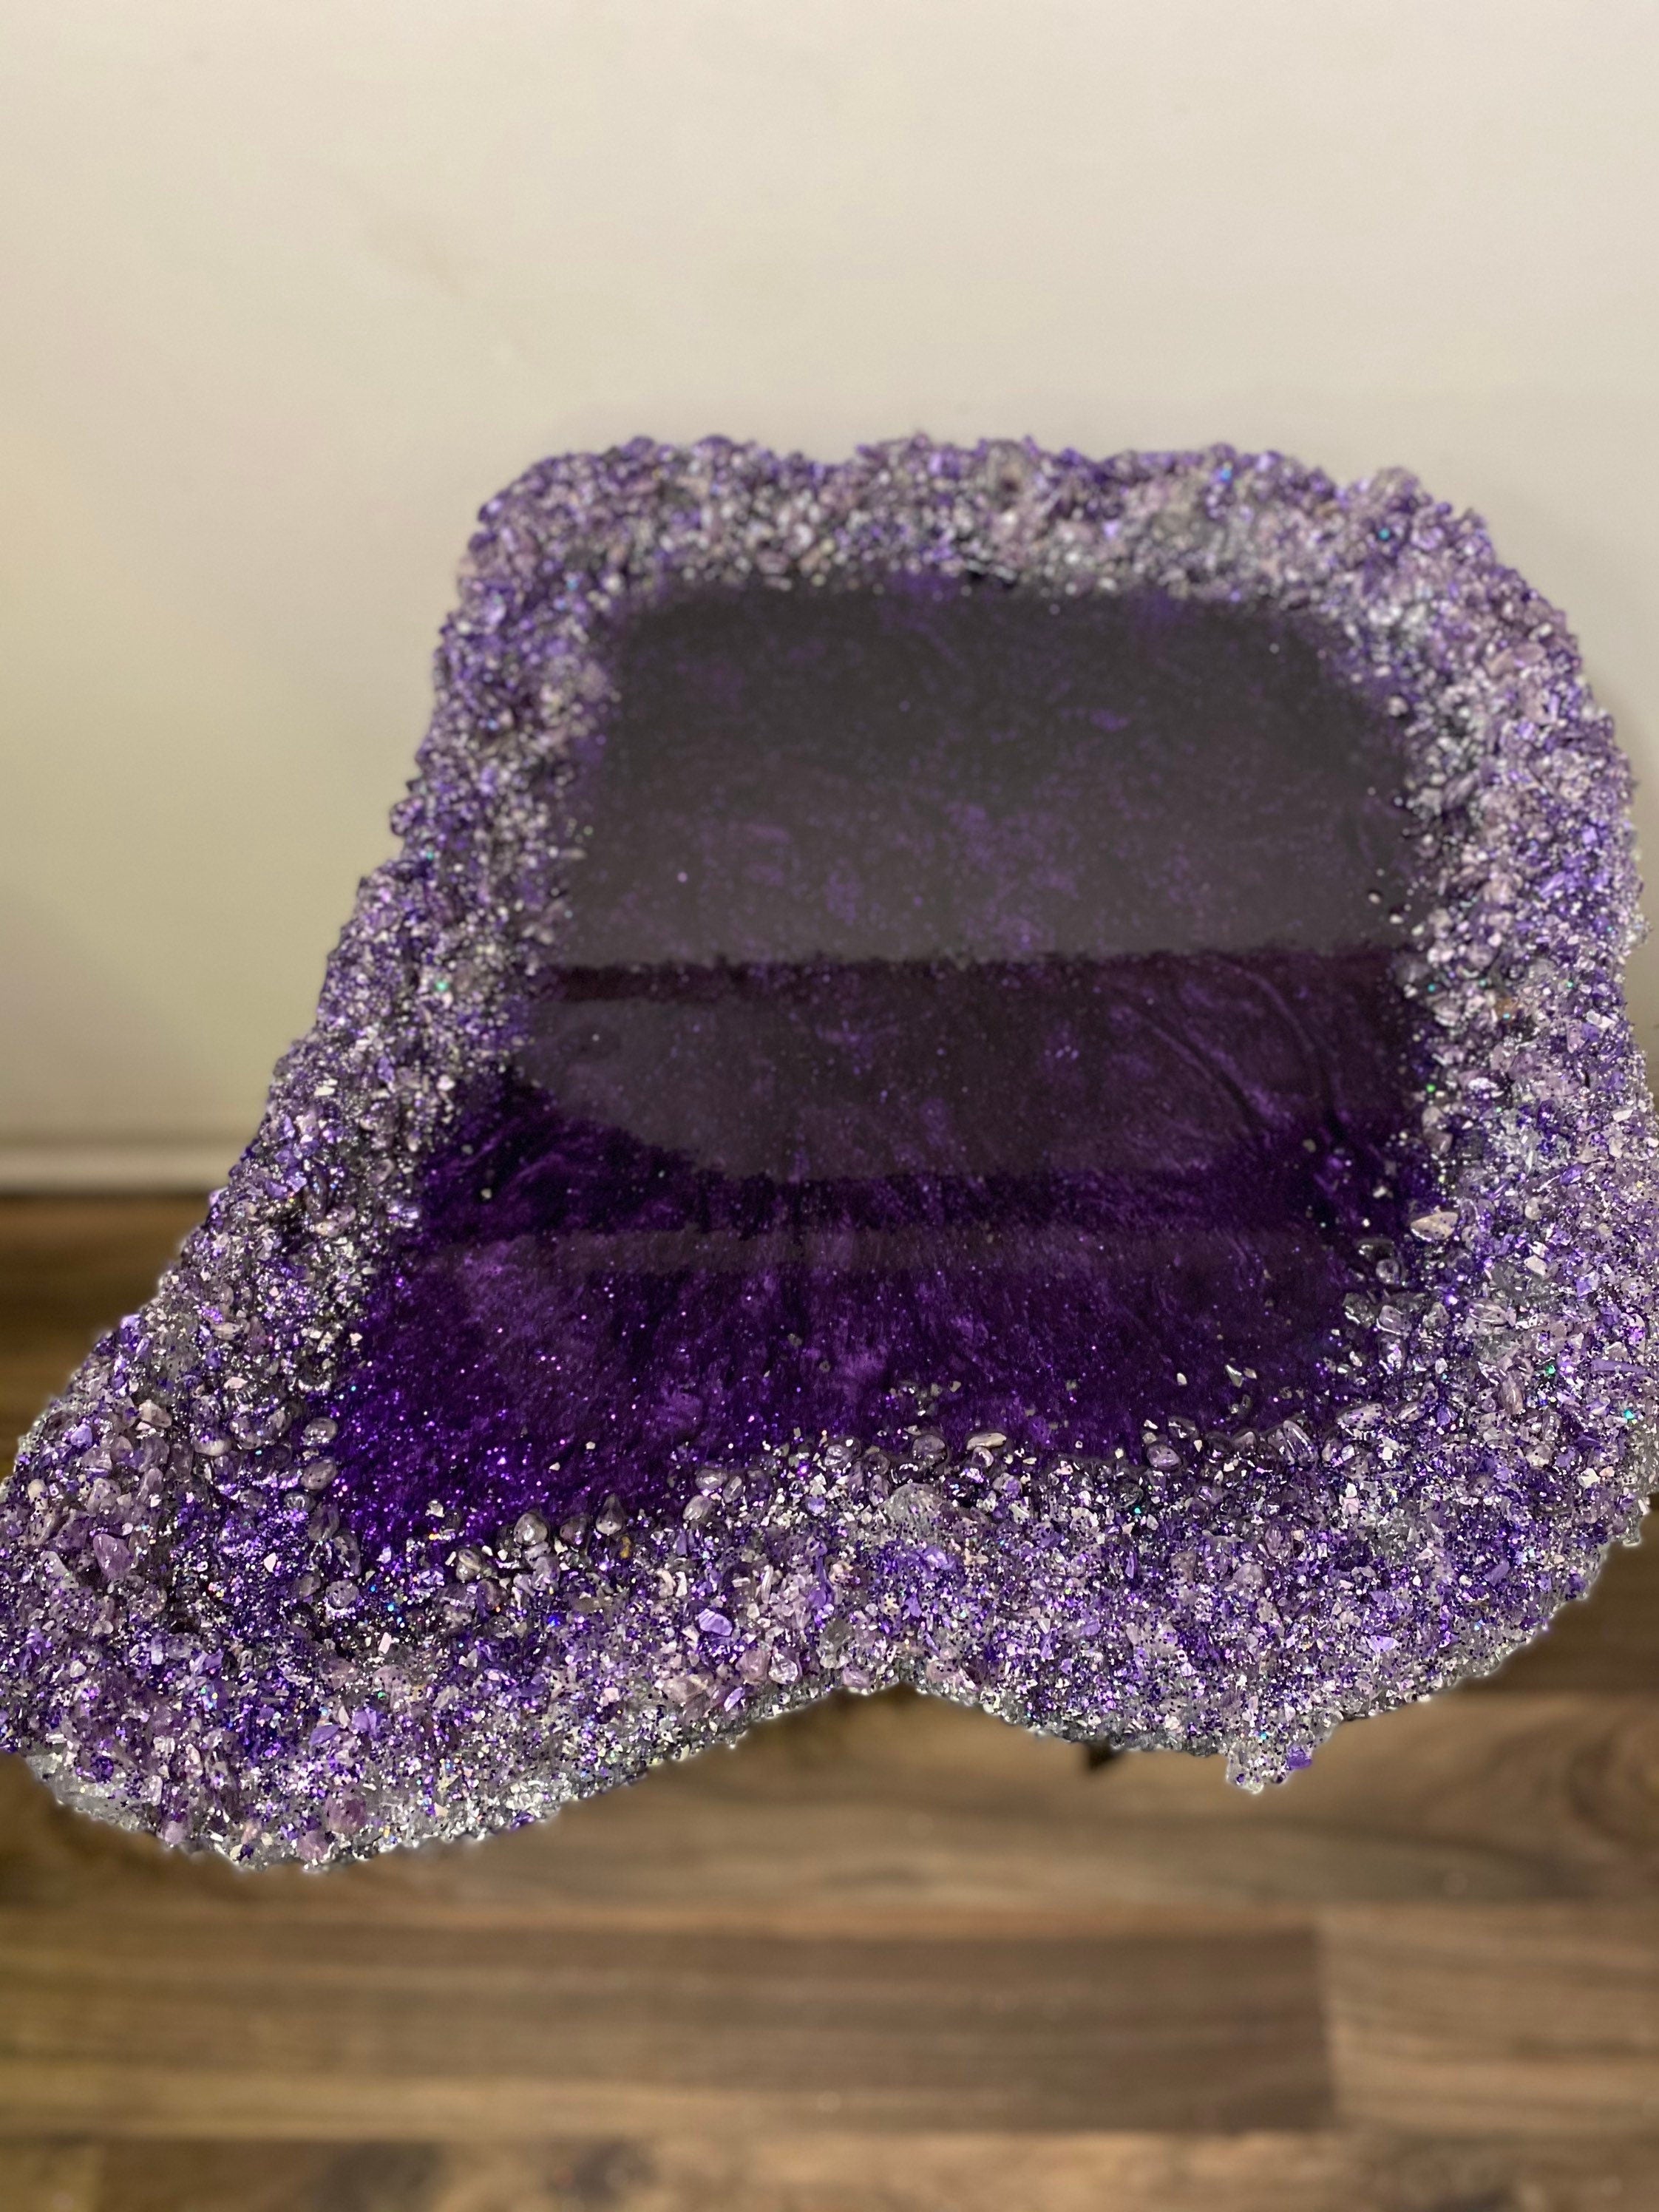 The Amethyst Table